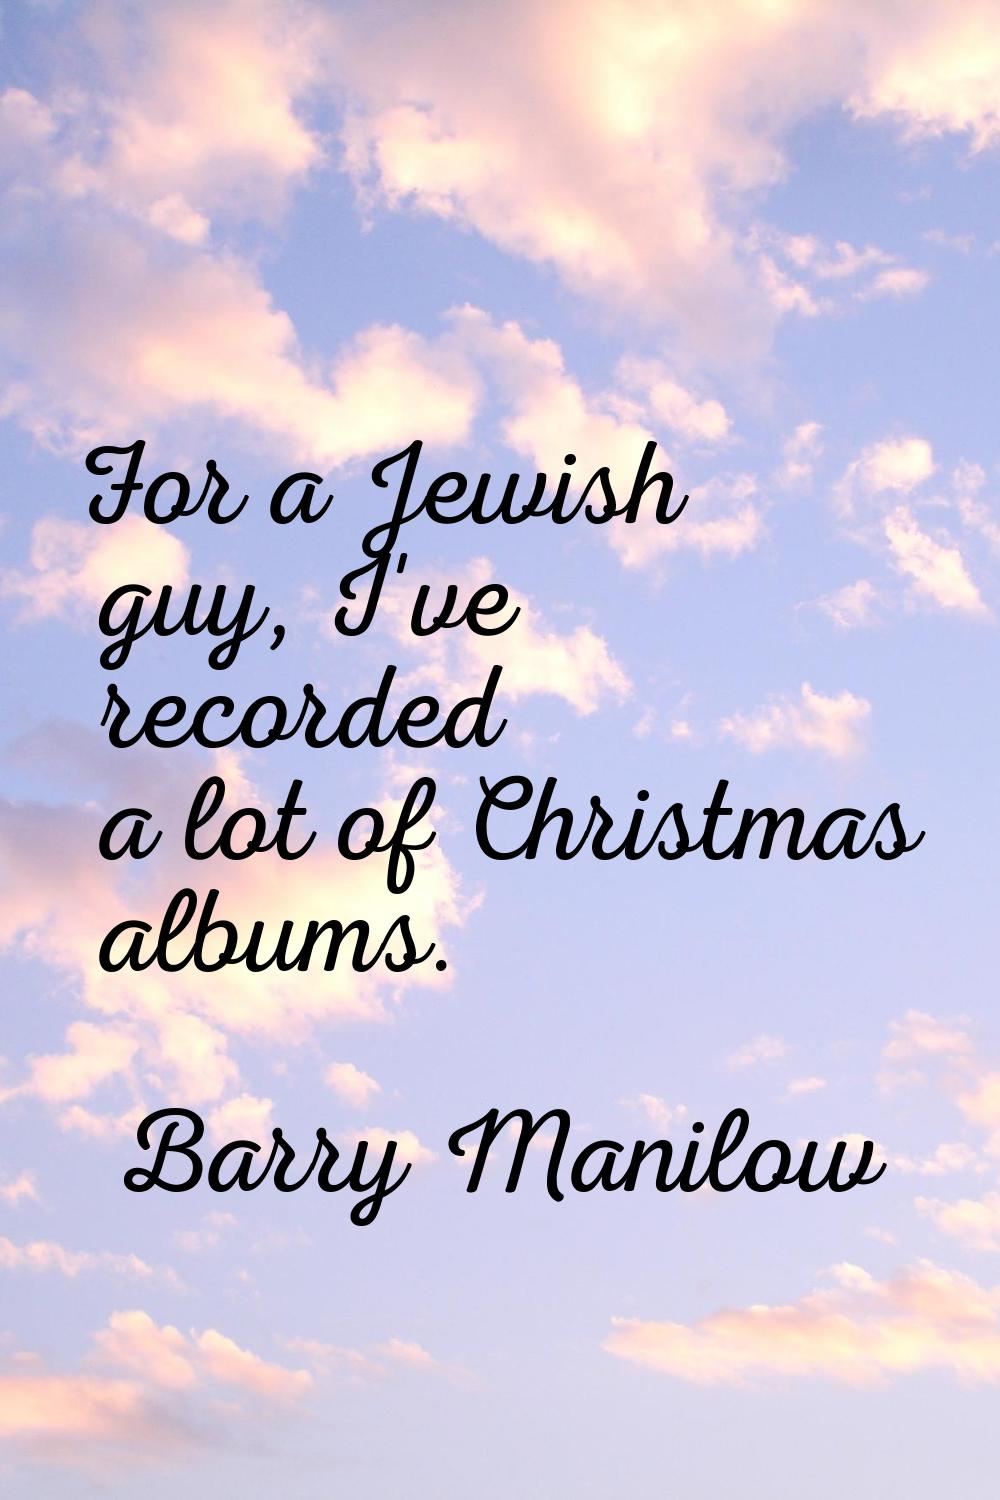 For a Jewish guy, I've recorded a lot of Christmas albums.